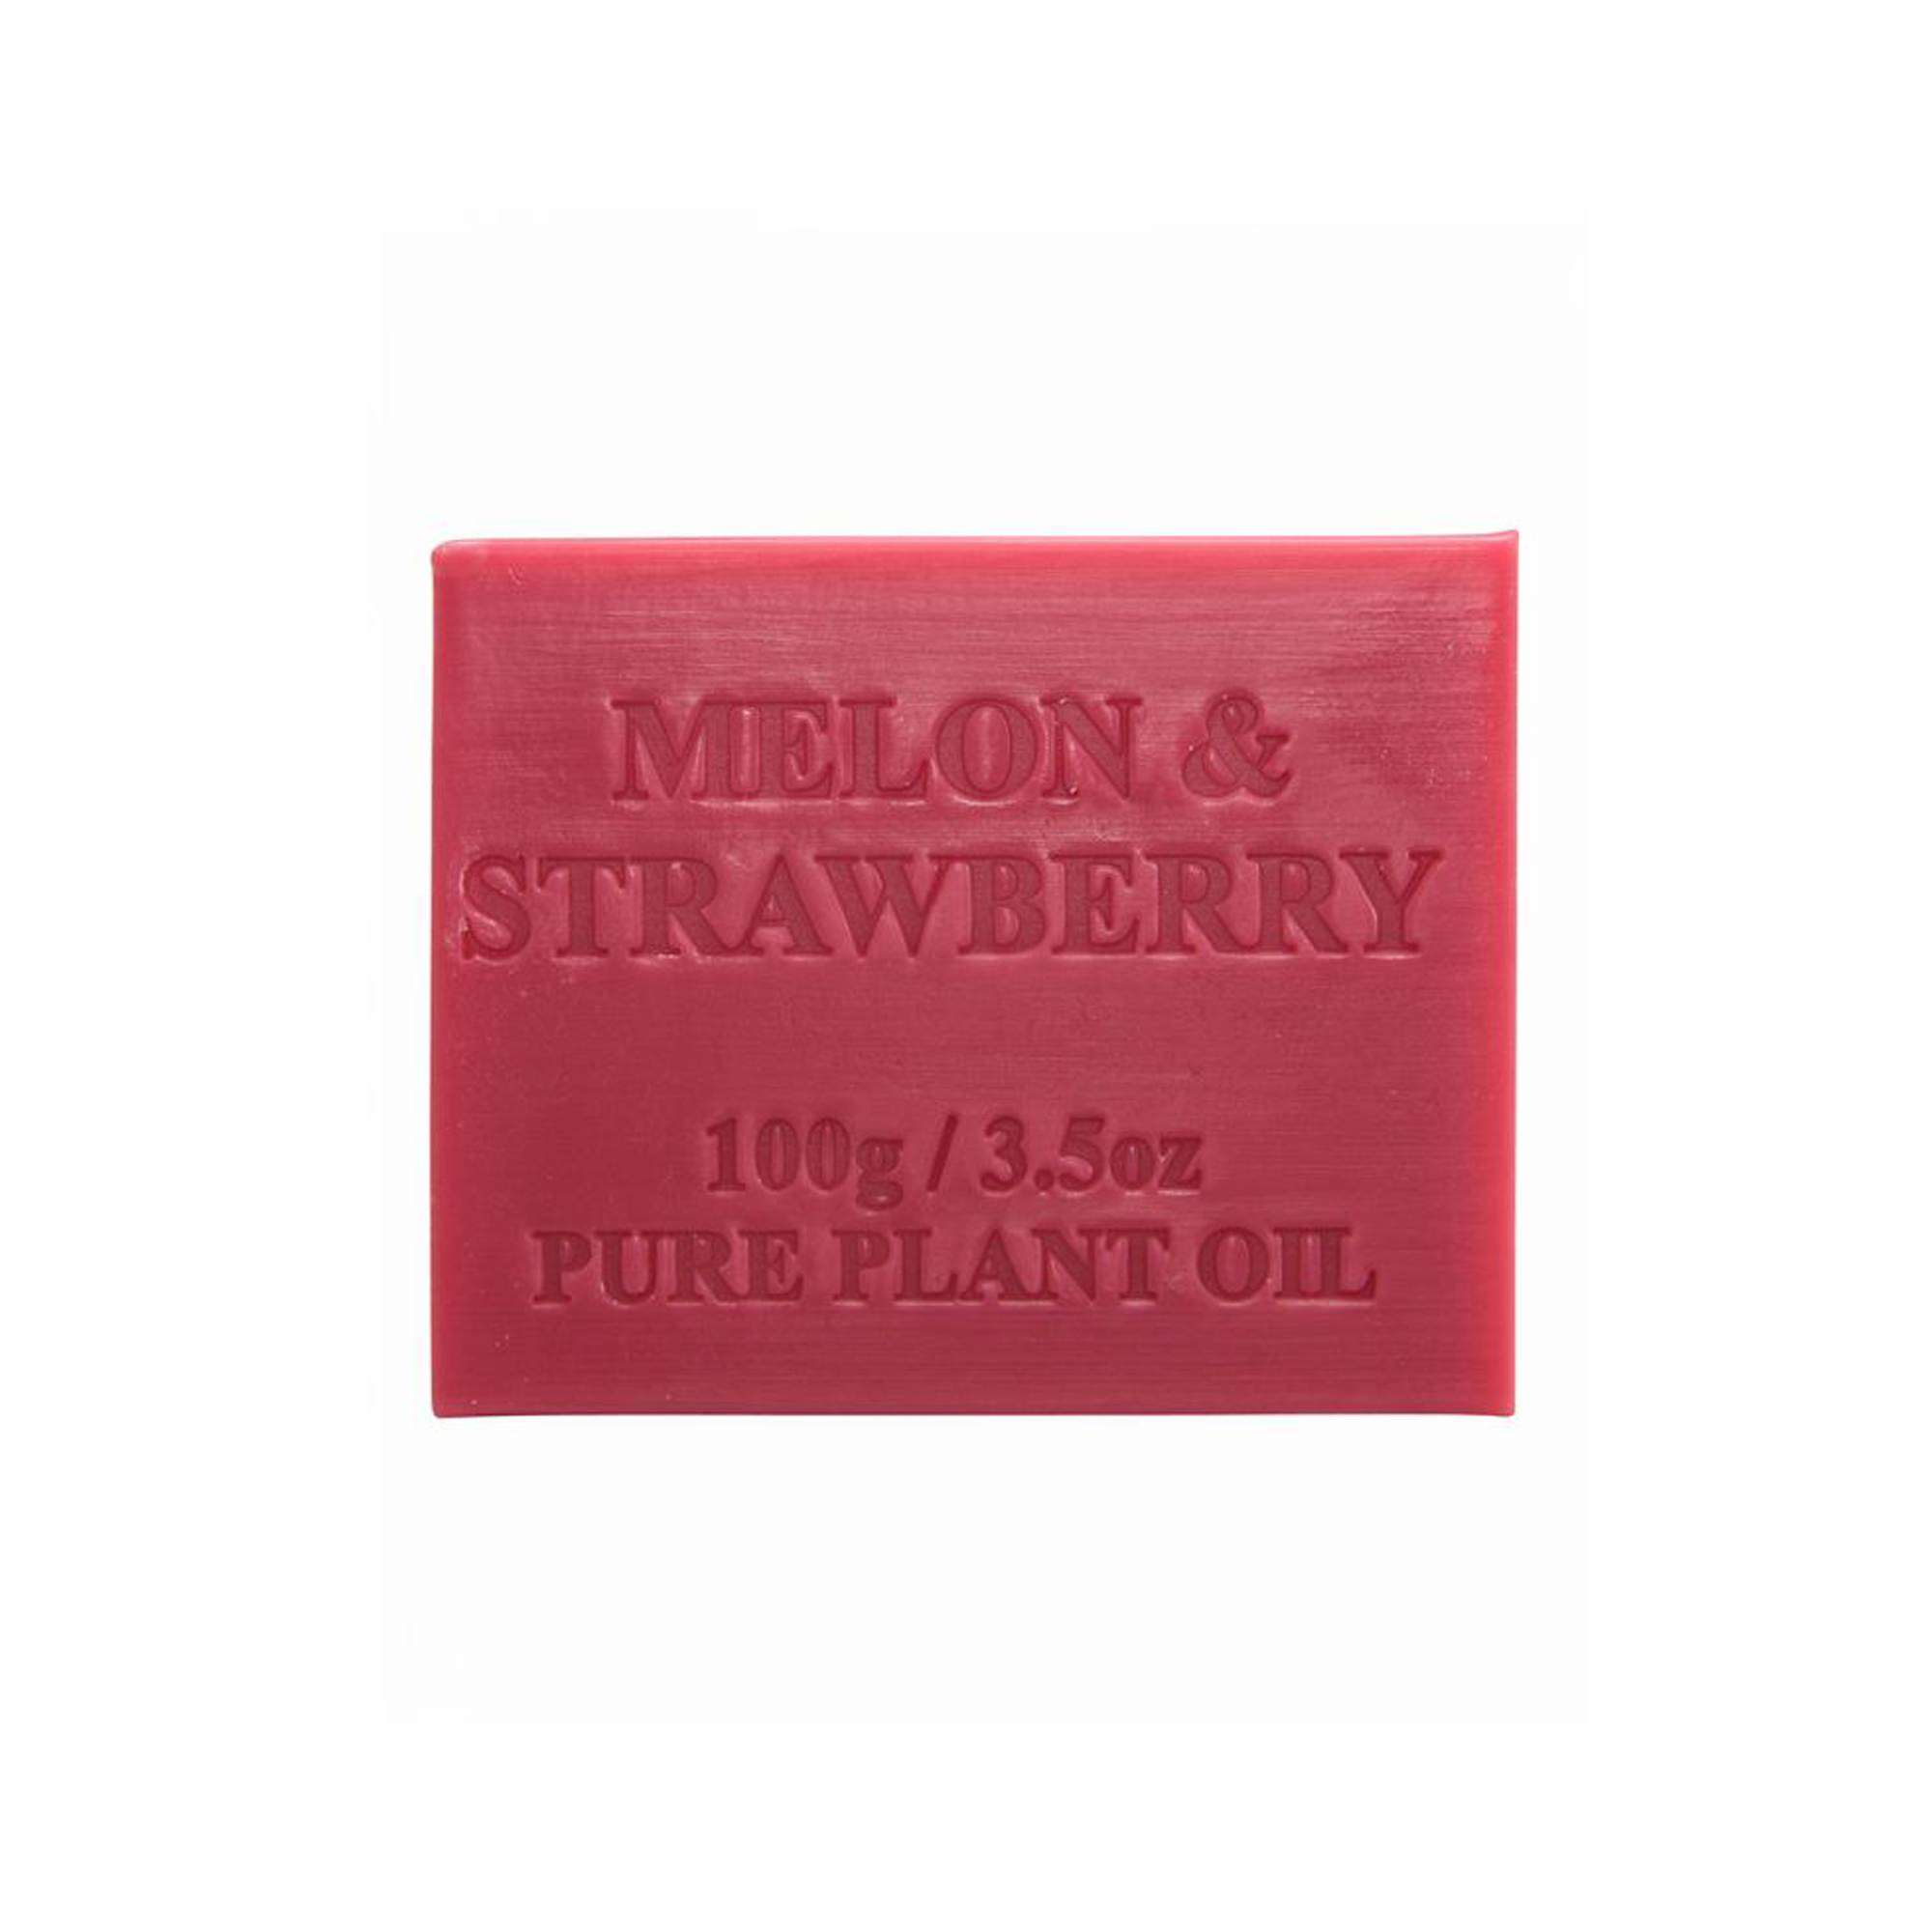 Melon and Strawberry 100g